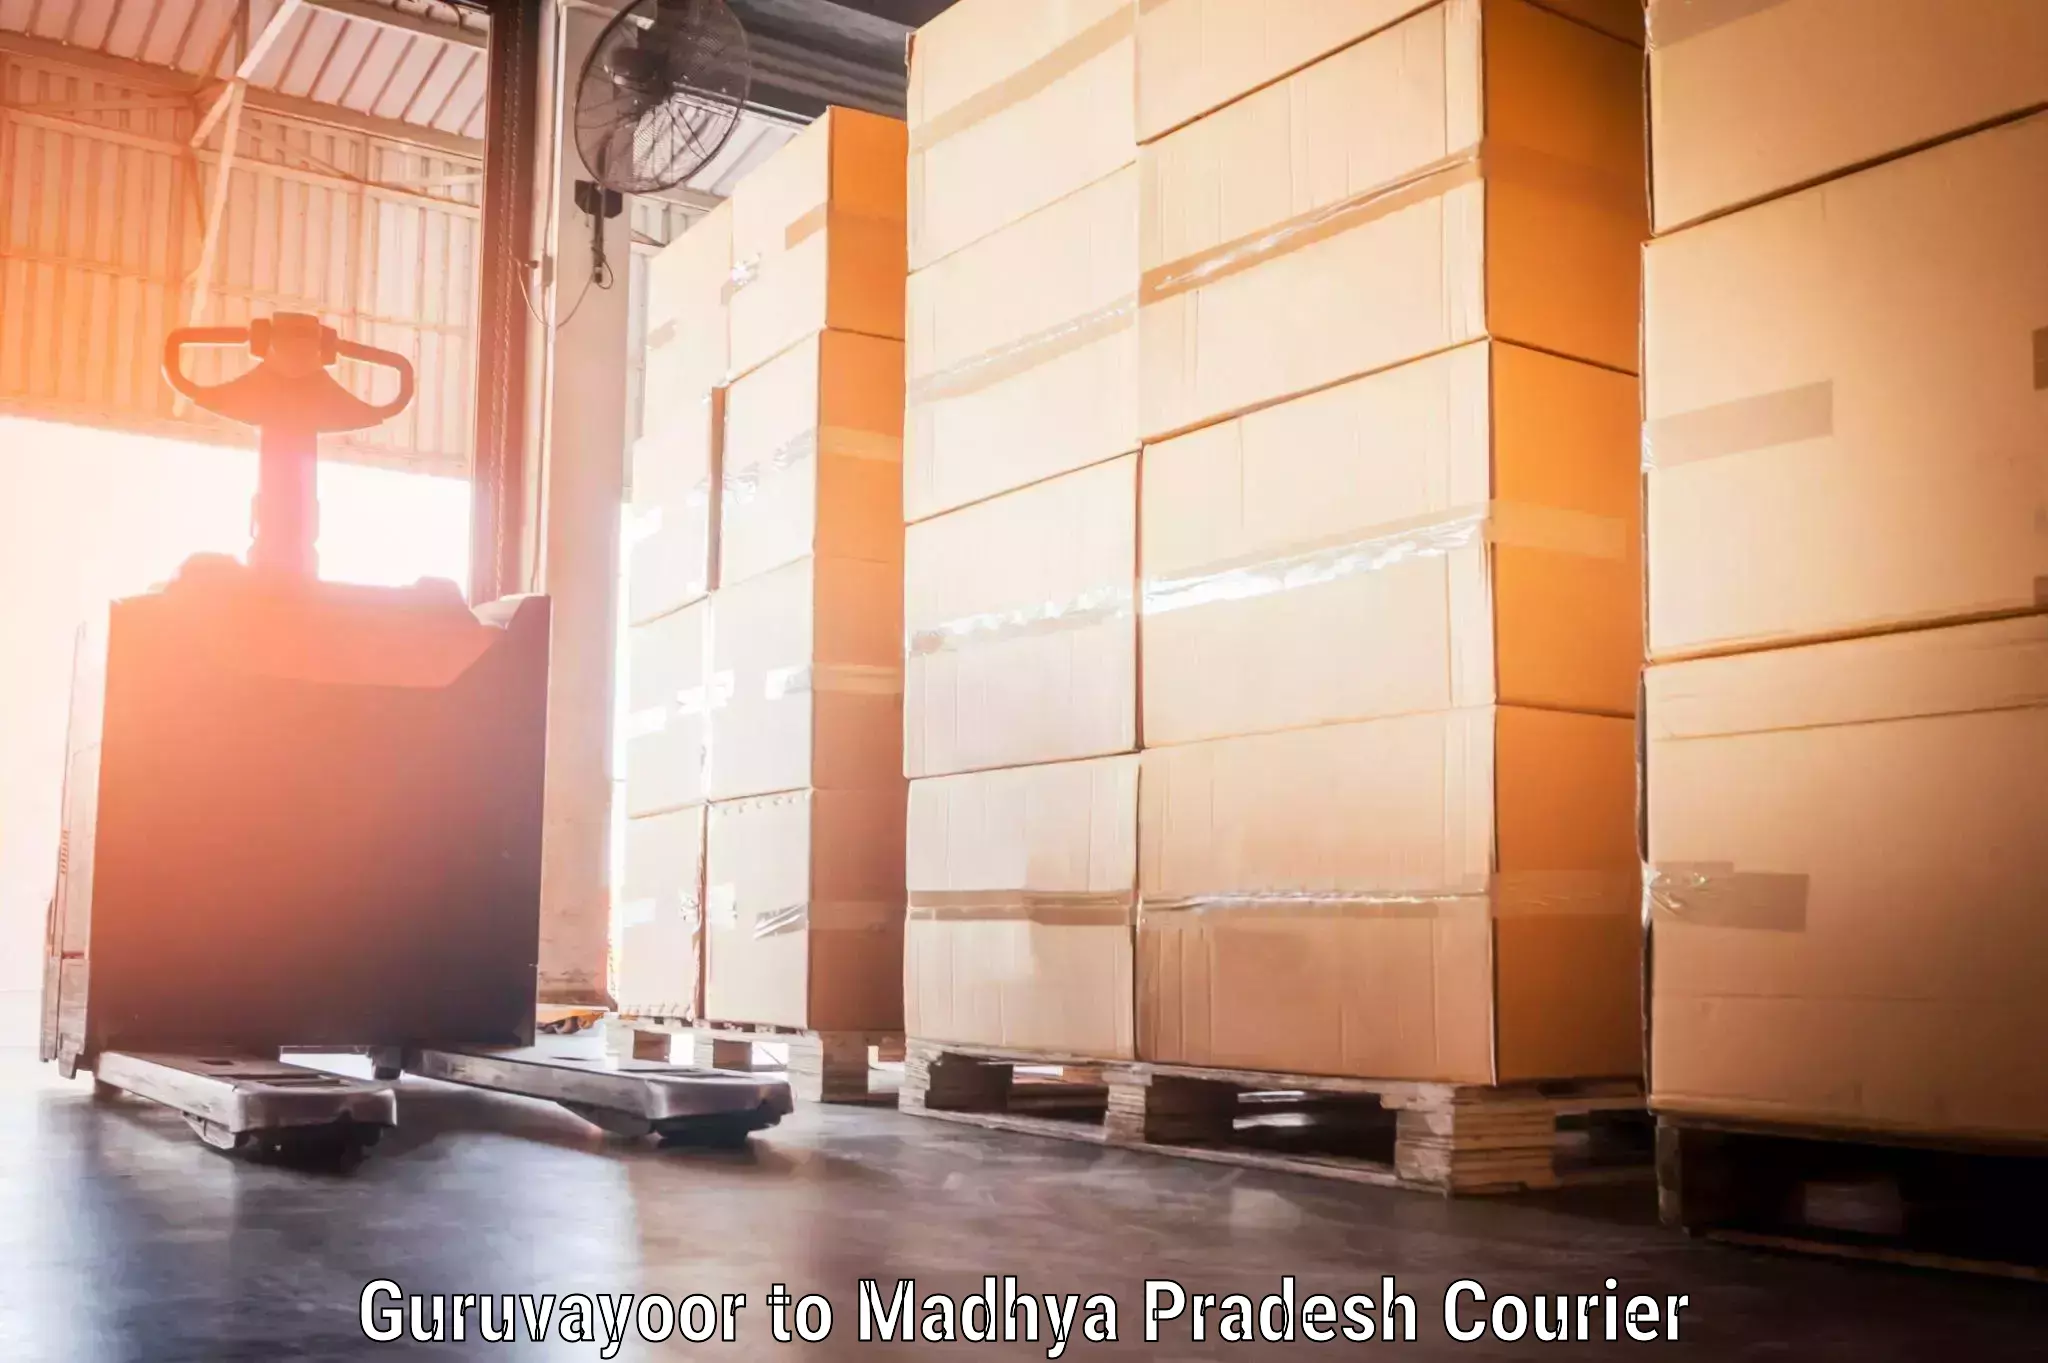 Baggage transport logistics in Guruvayoor to Athner